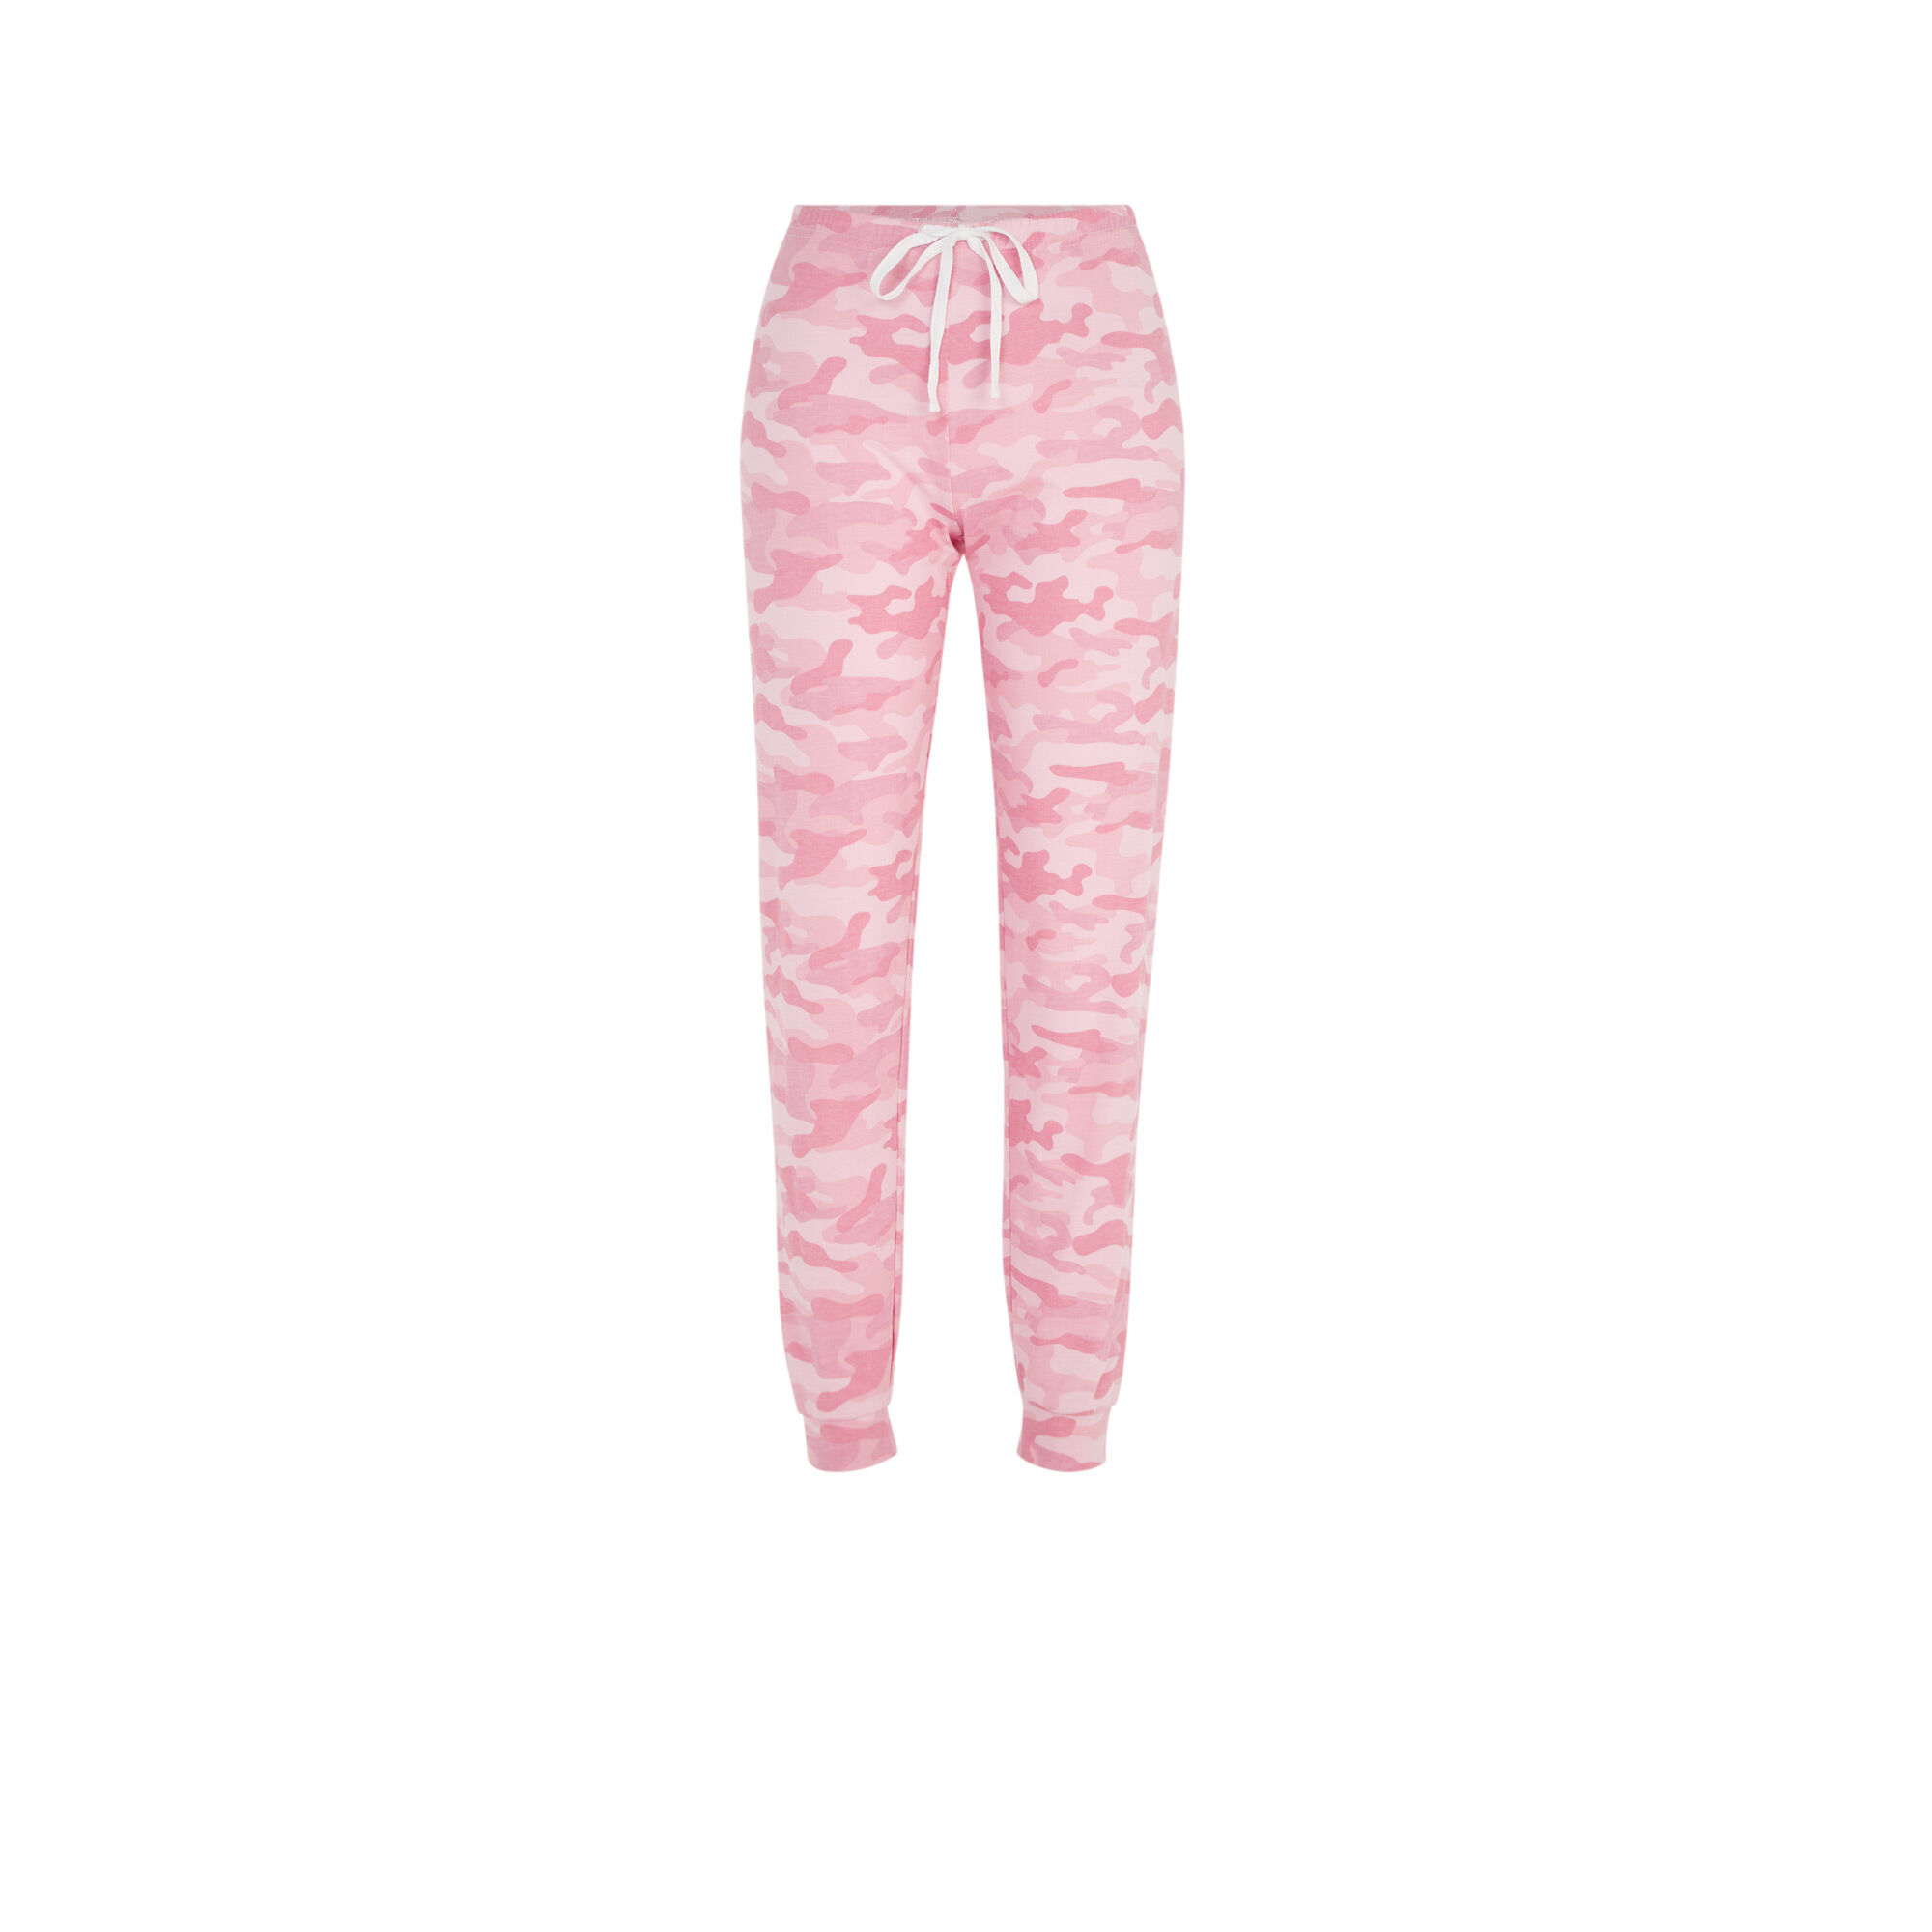 pink tracksuit bottoms